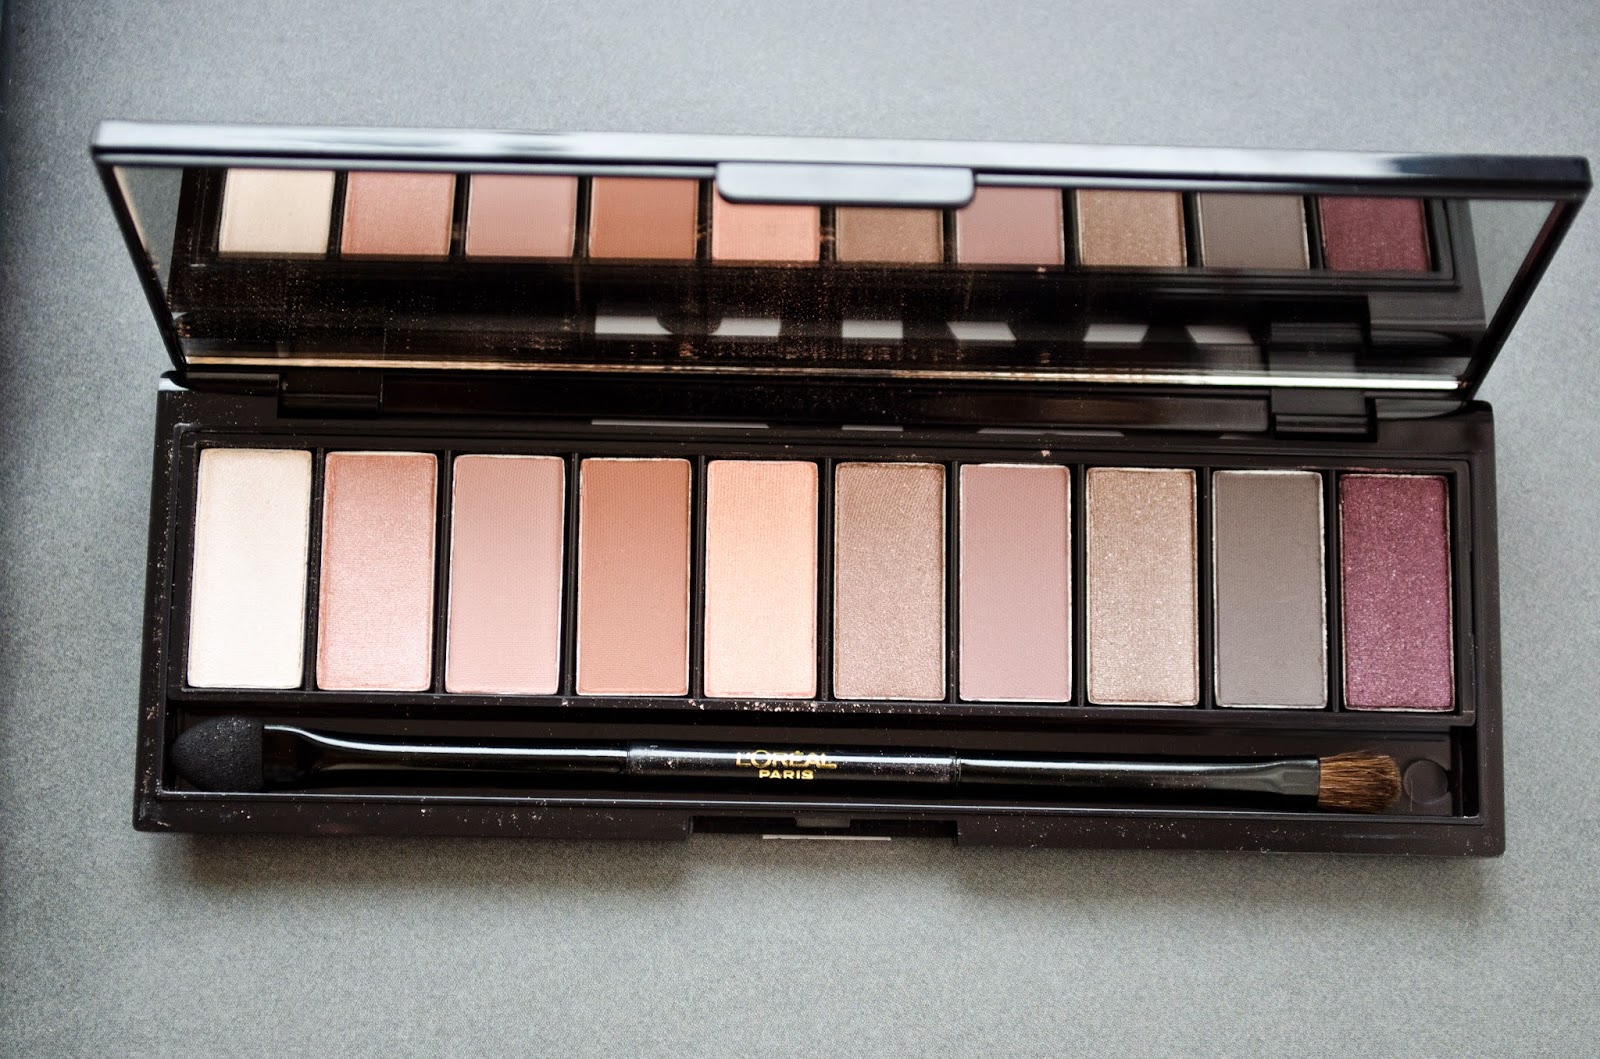 LOreal La Palette Nude Rose & Beige Review + Swatches 